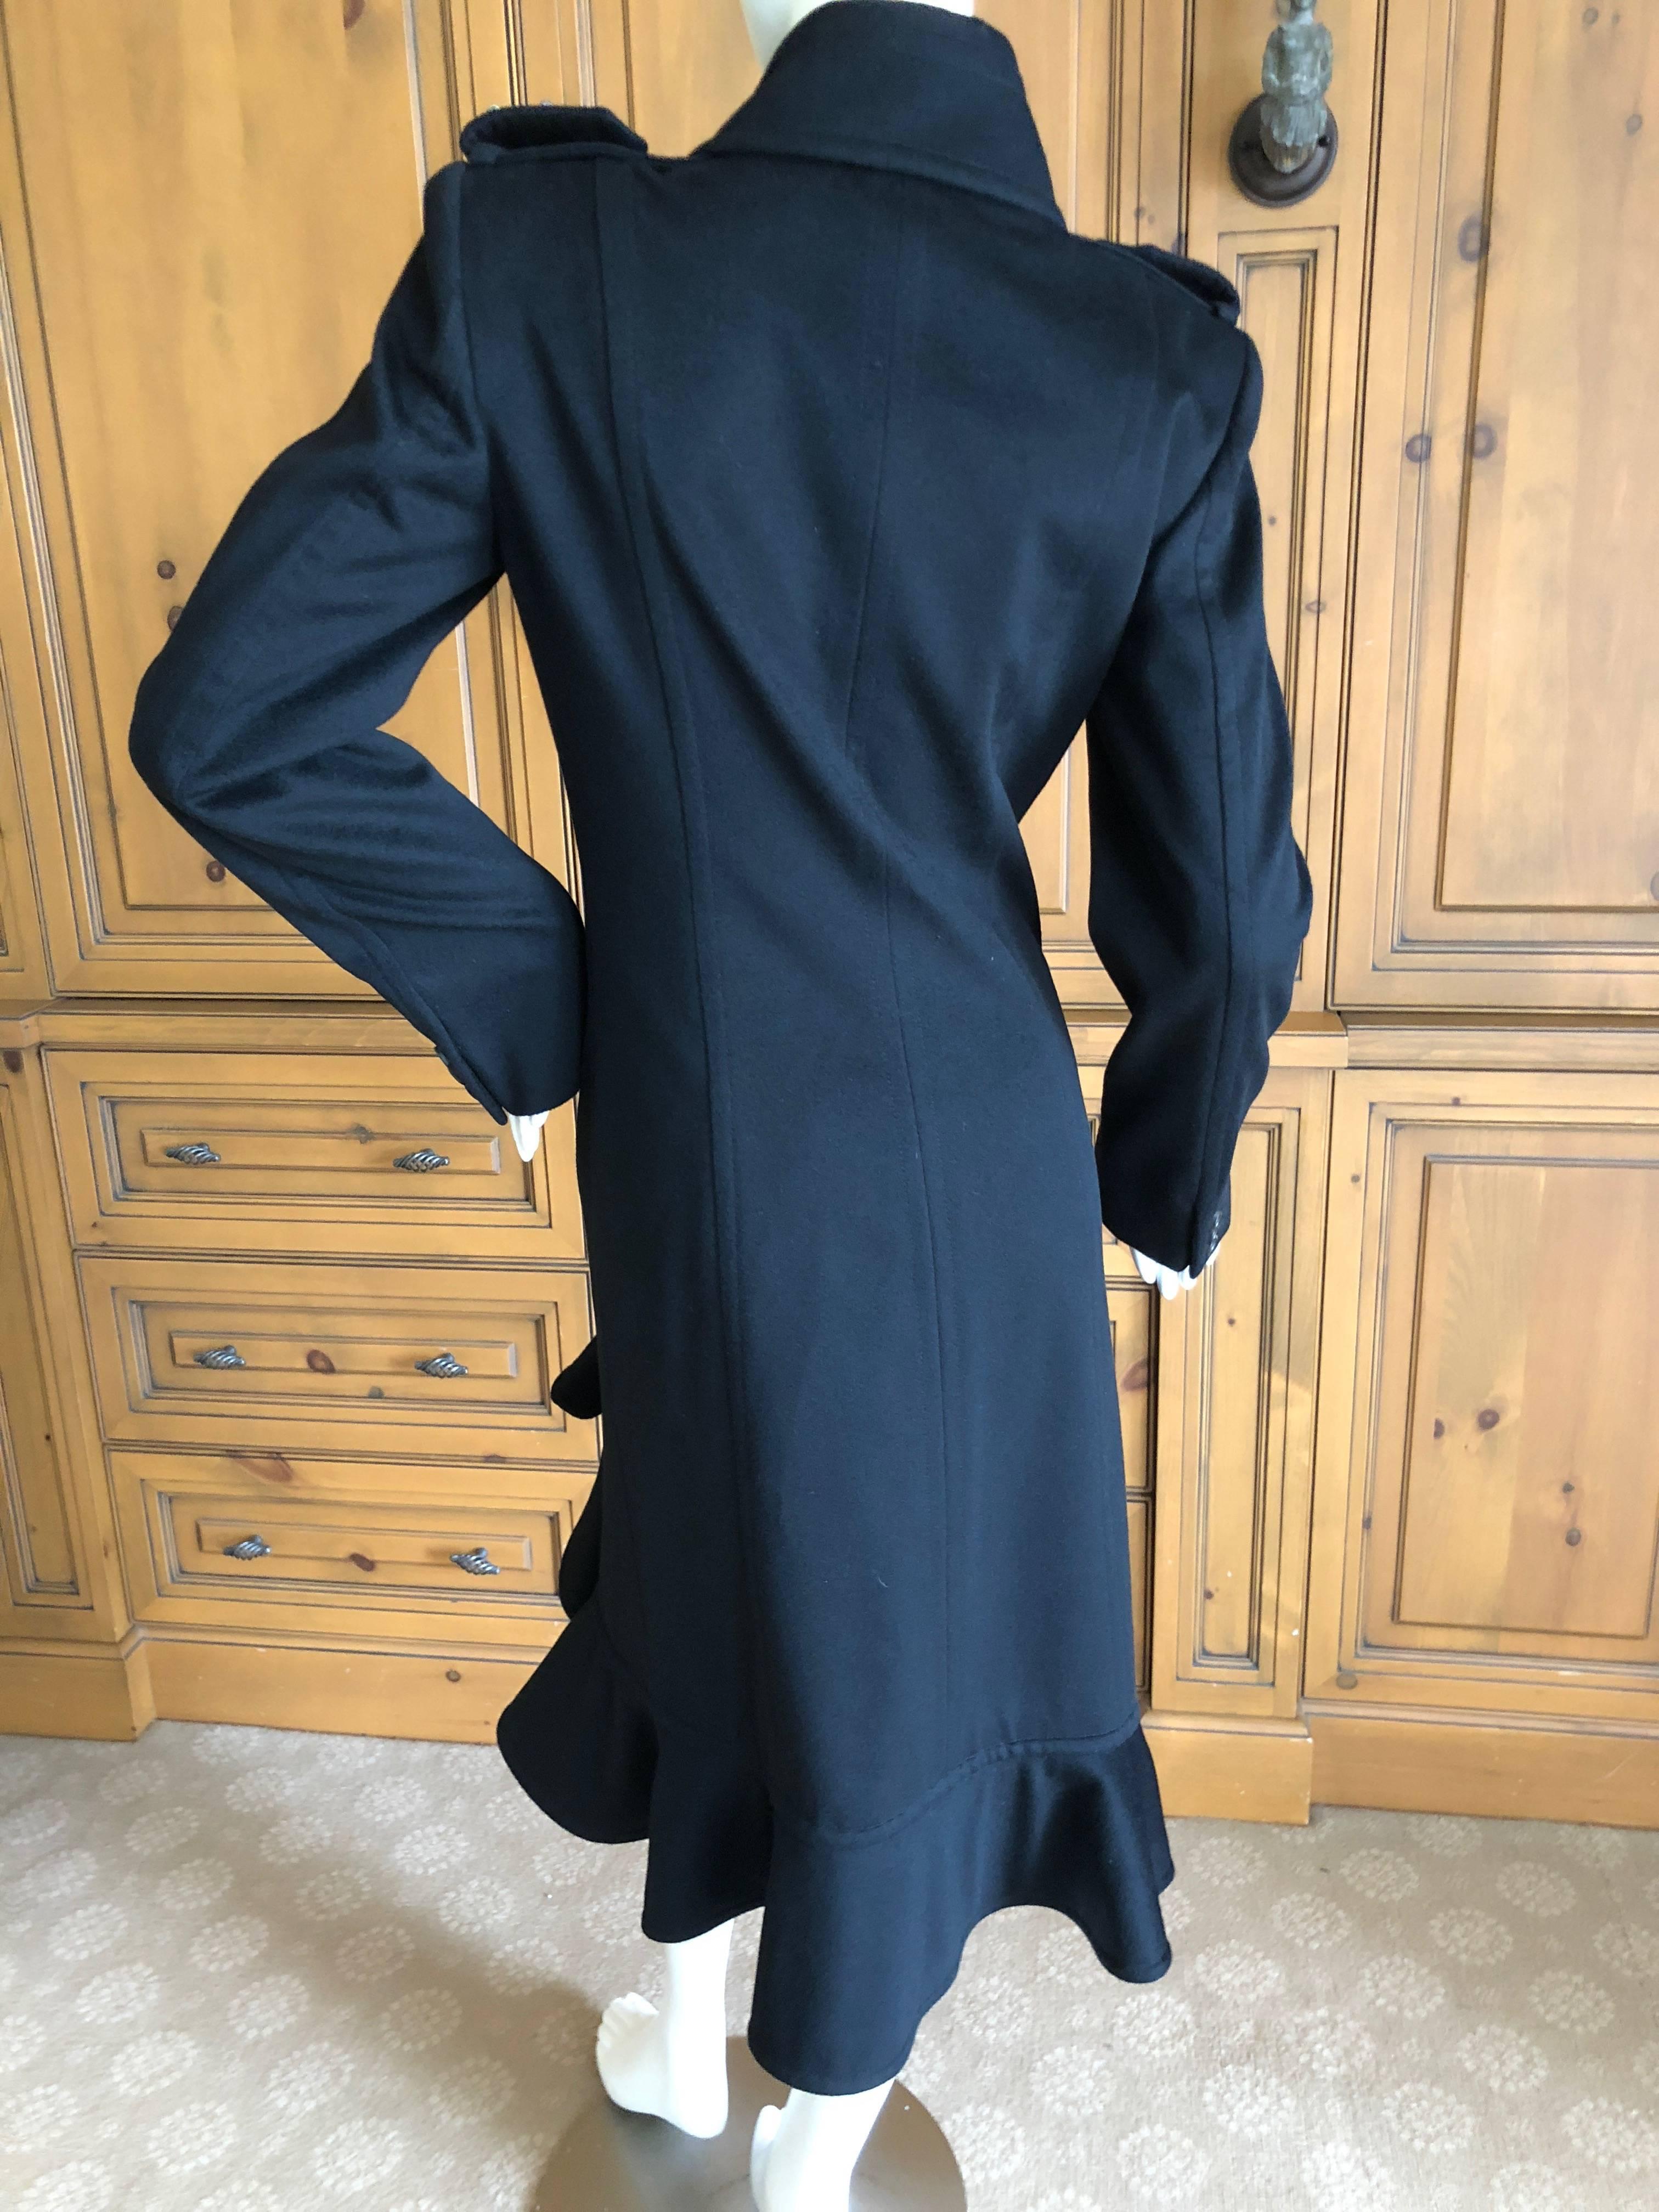 Yves Saint Laurent by Tom Ford Black Wool Ruffle Front Coat from Fall 2004 For Sale 3